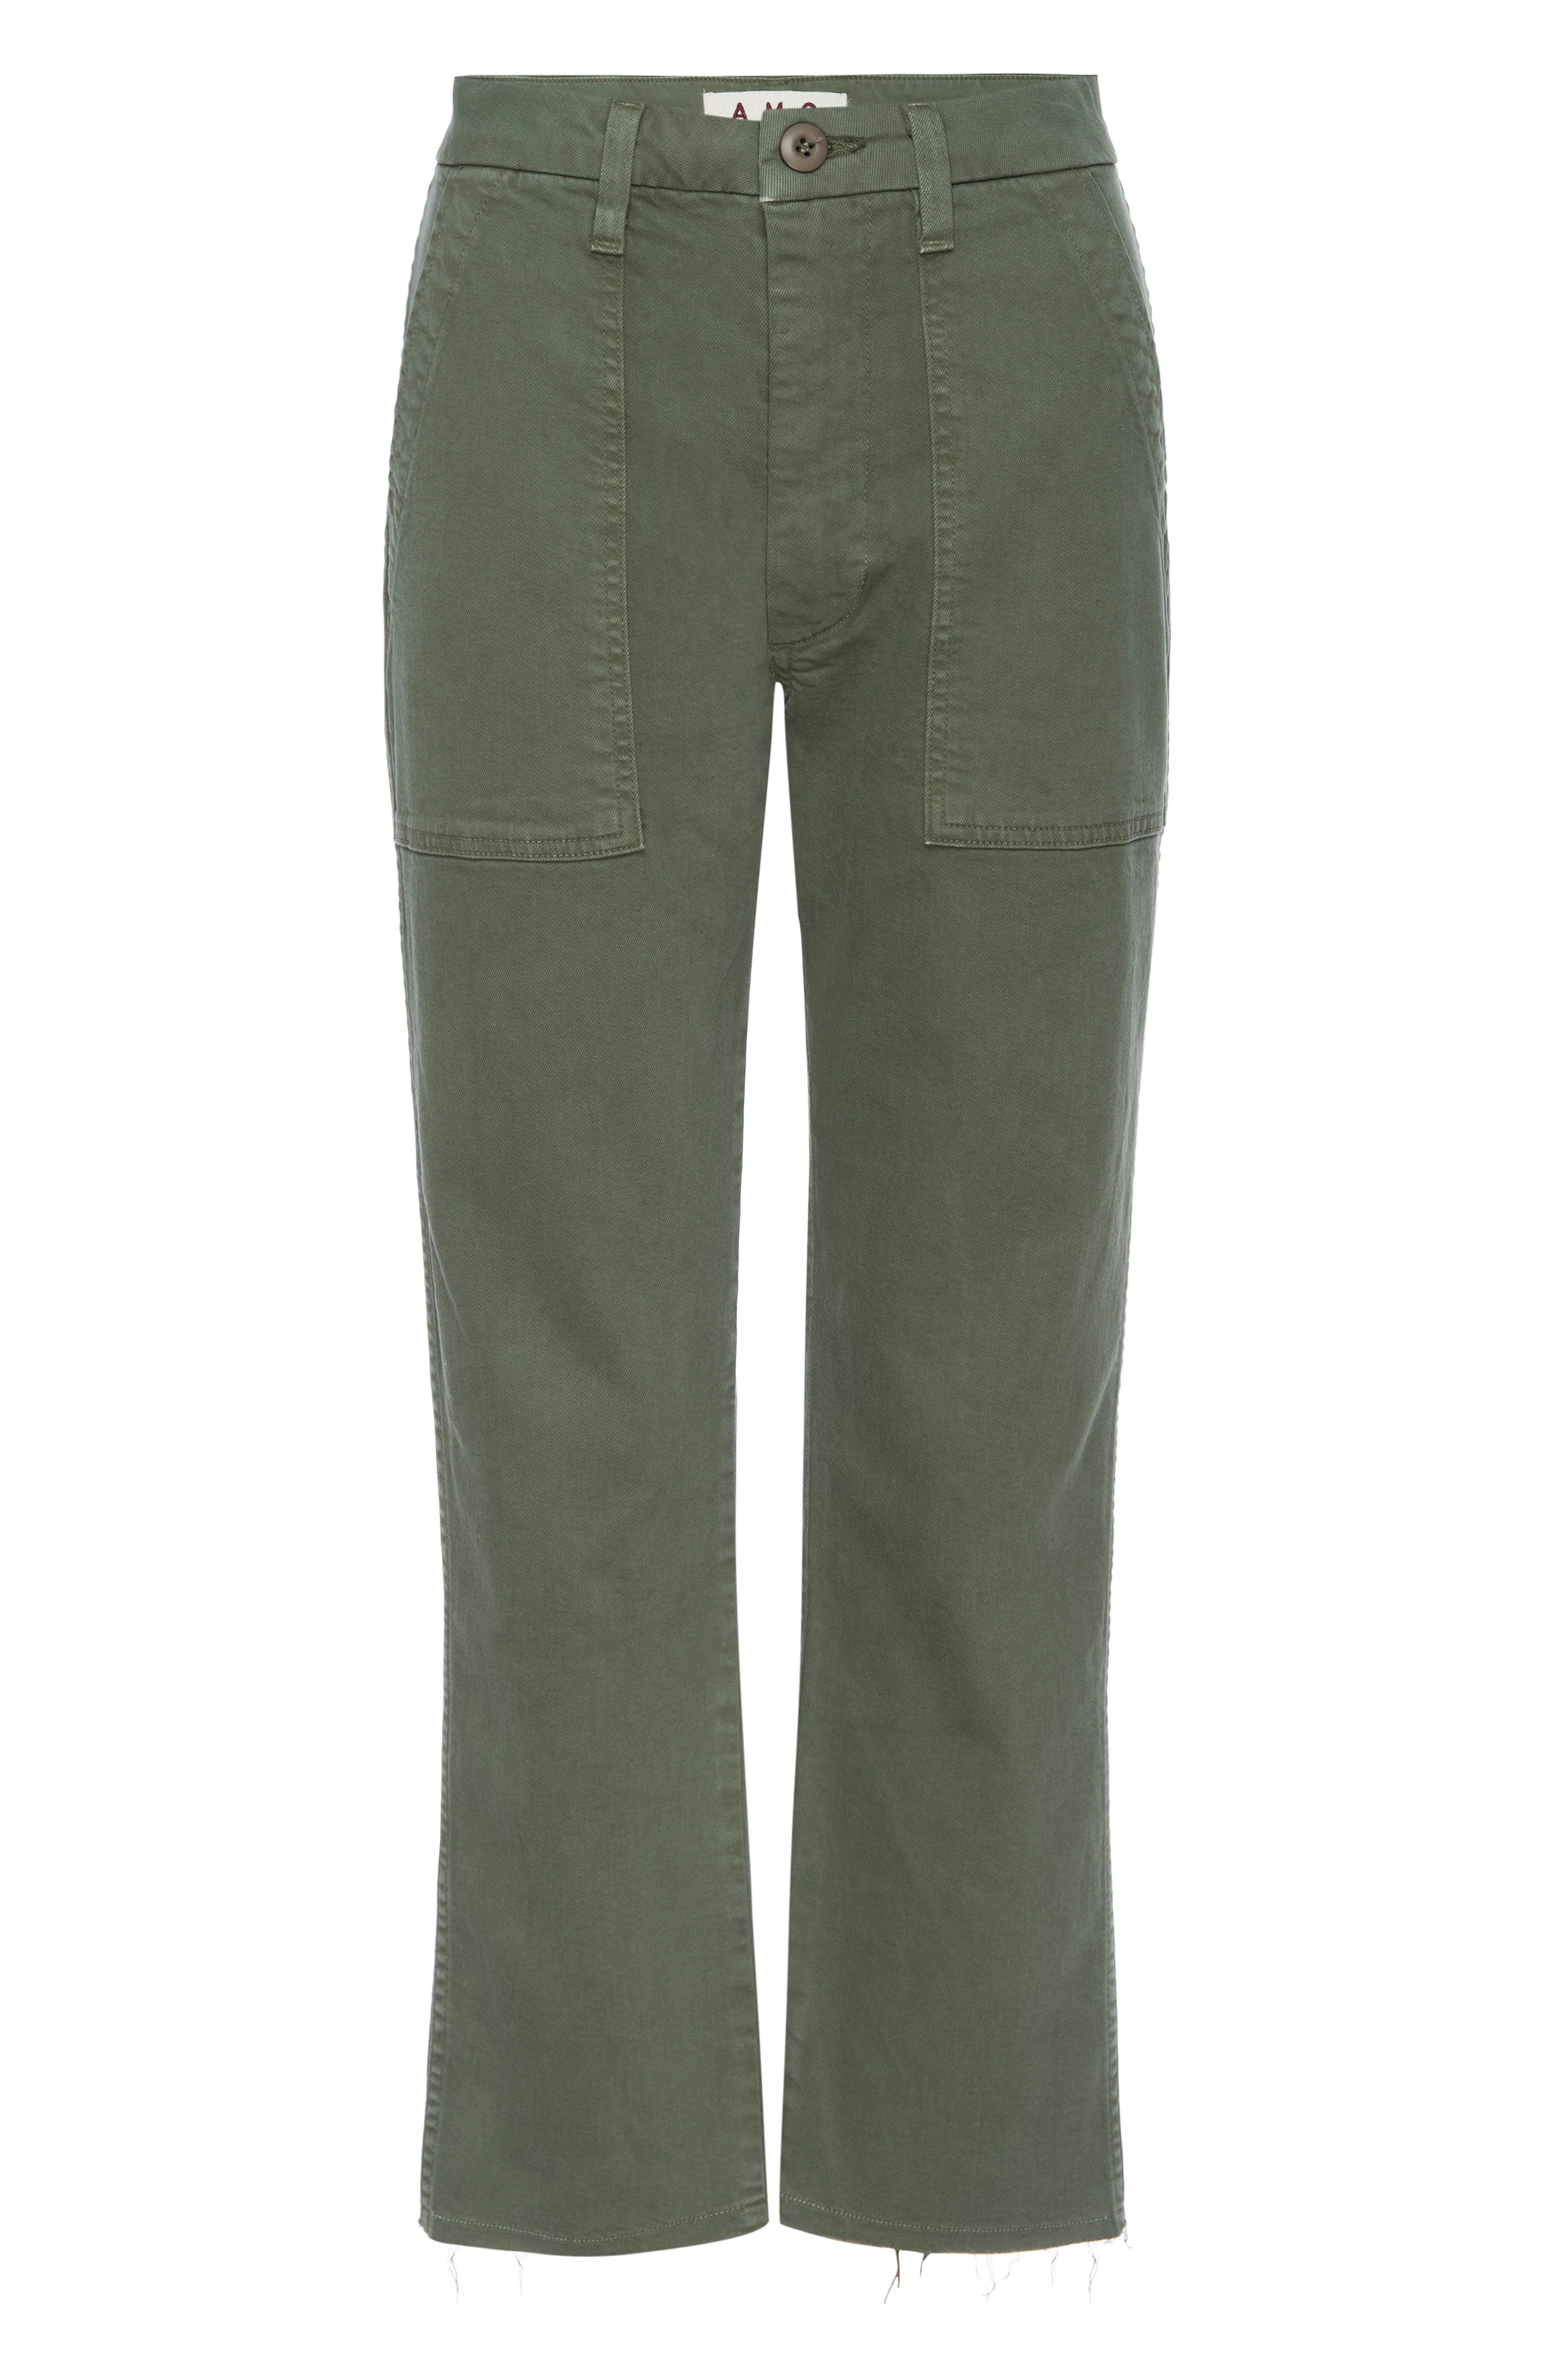 Easy Army Trouser